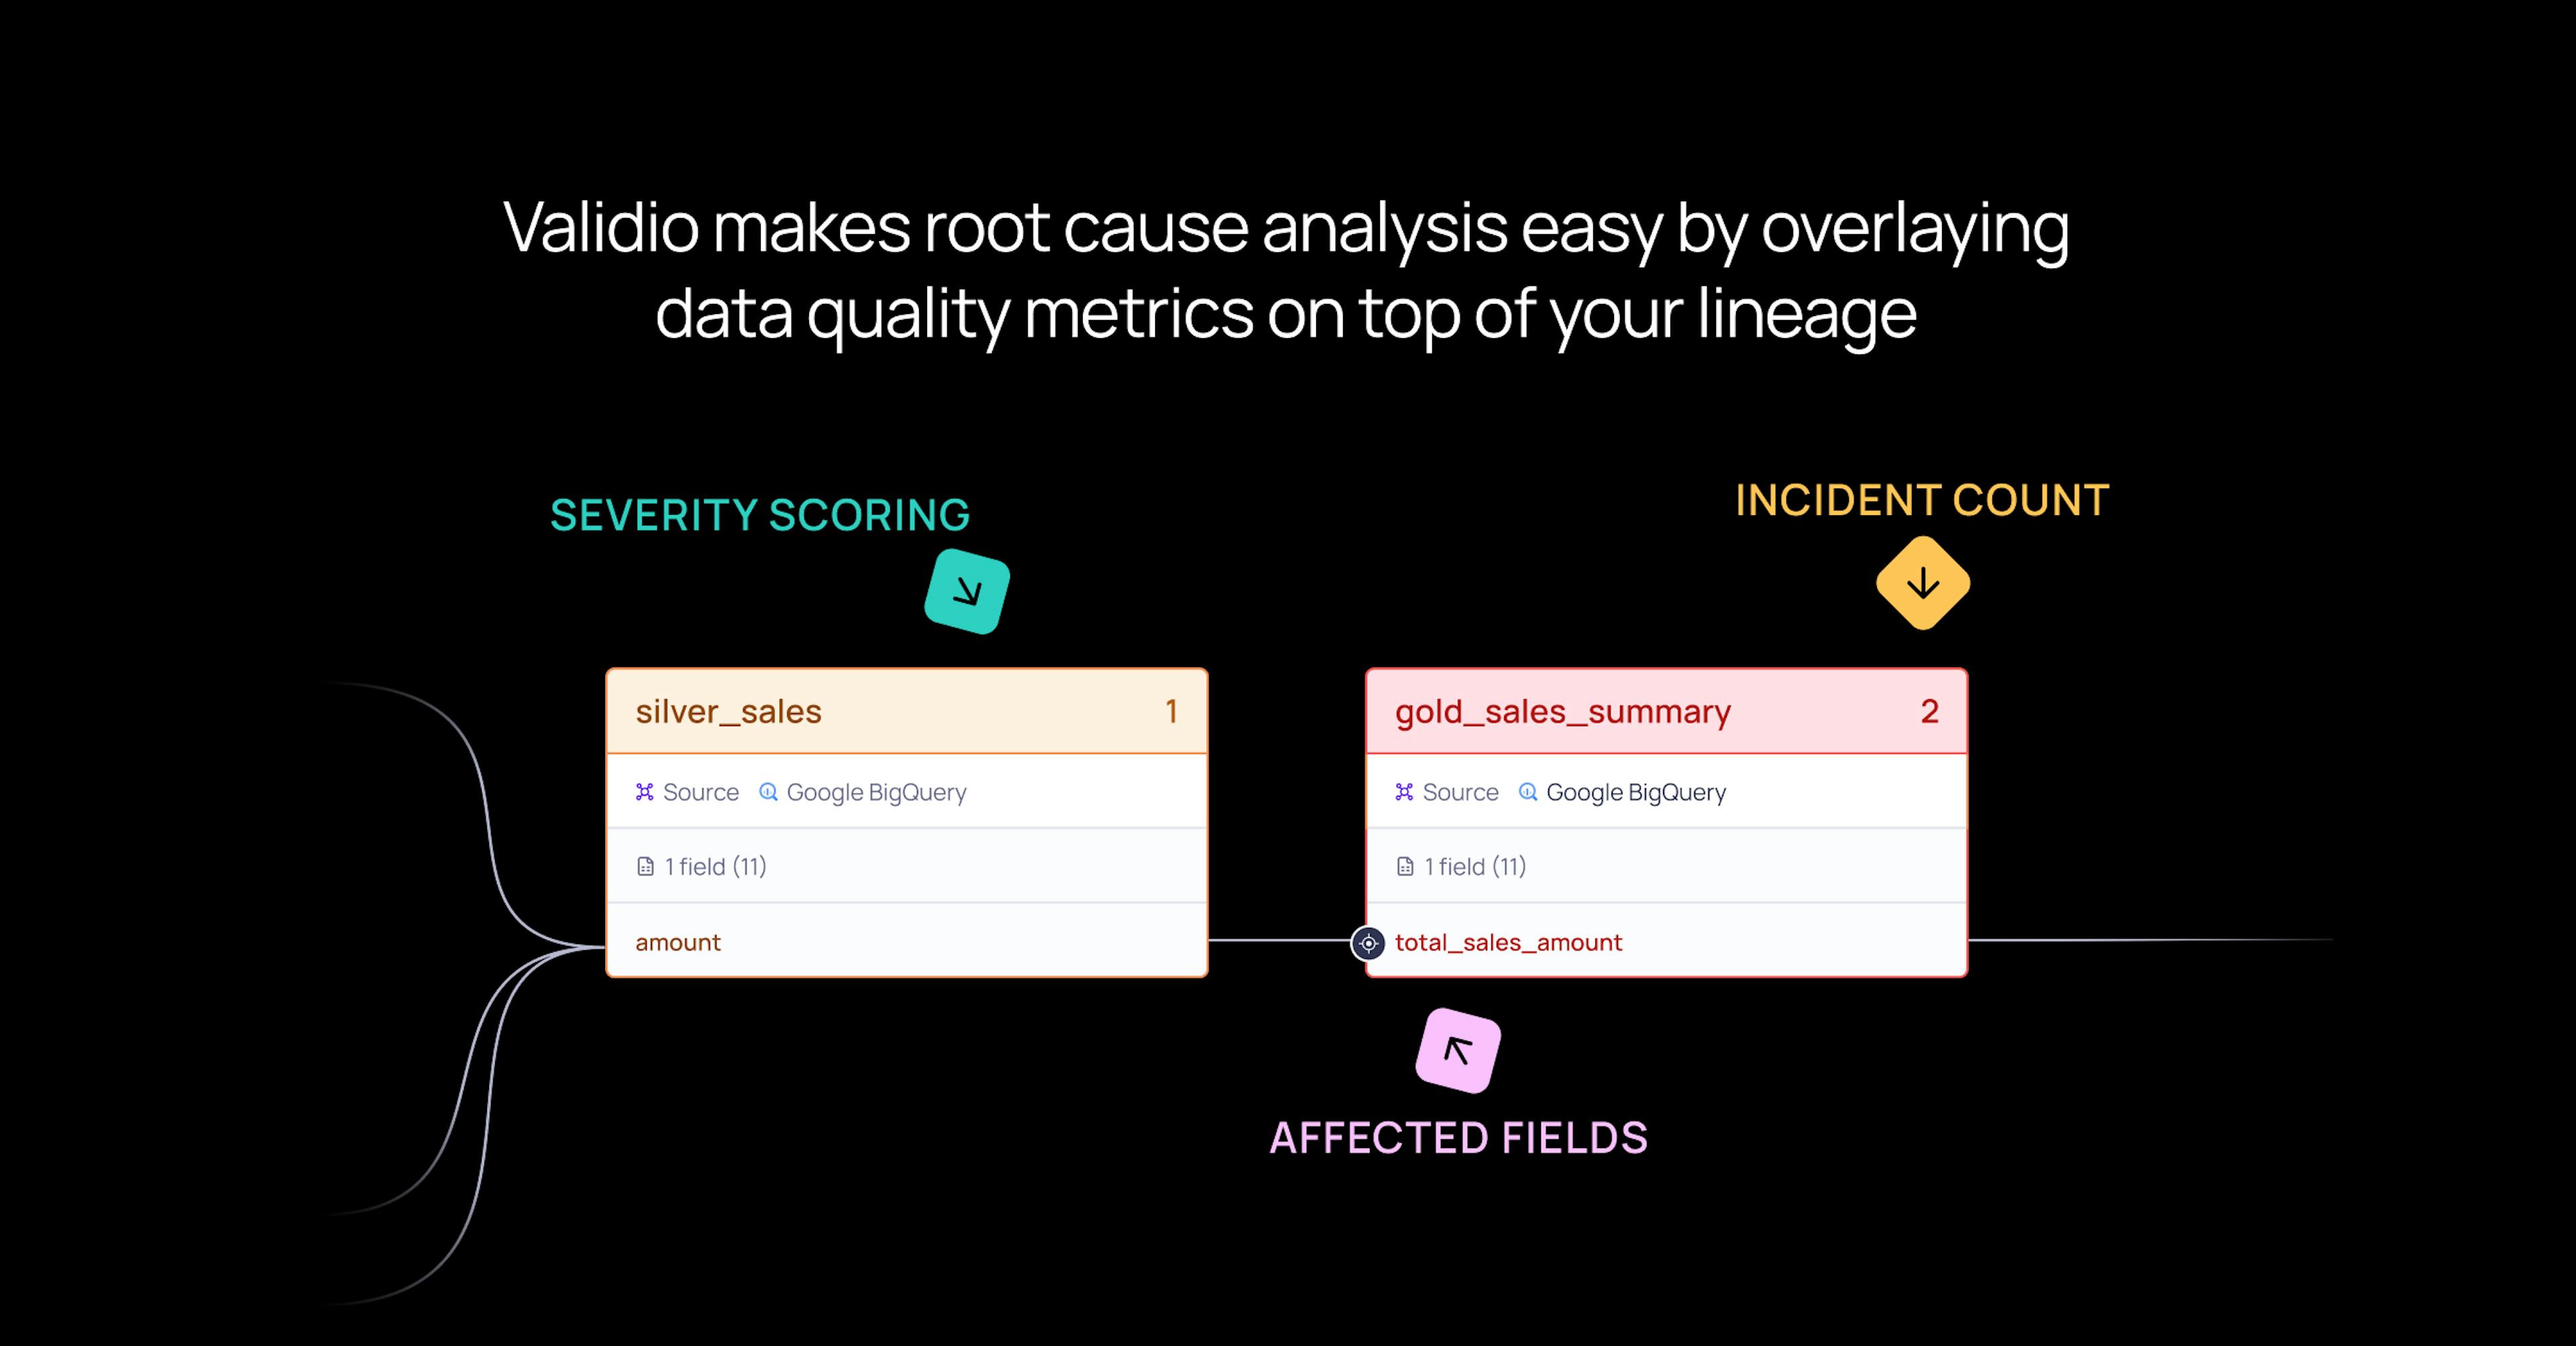 Root cause analysis made easy with data quality on lineage